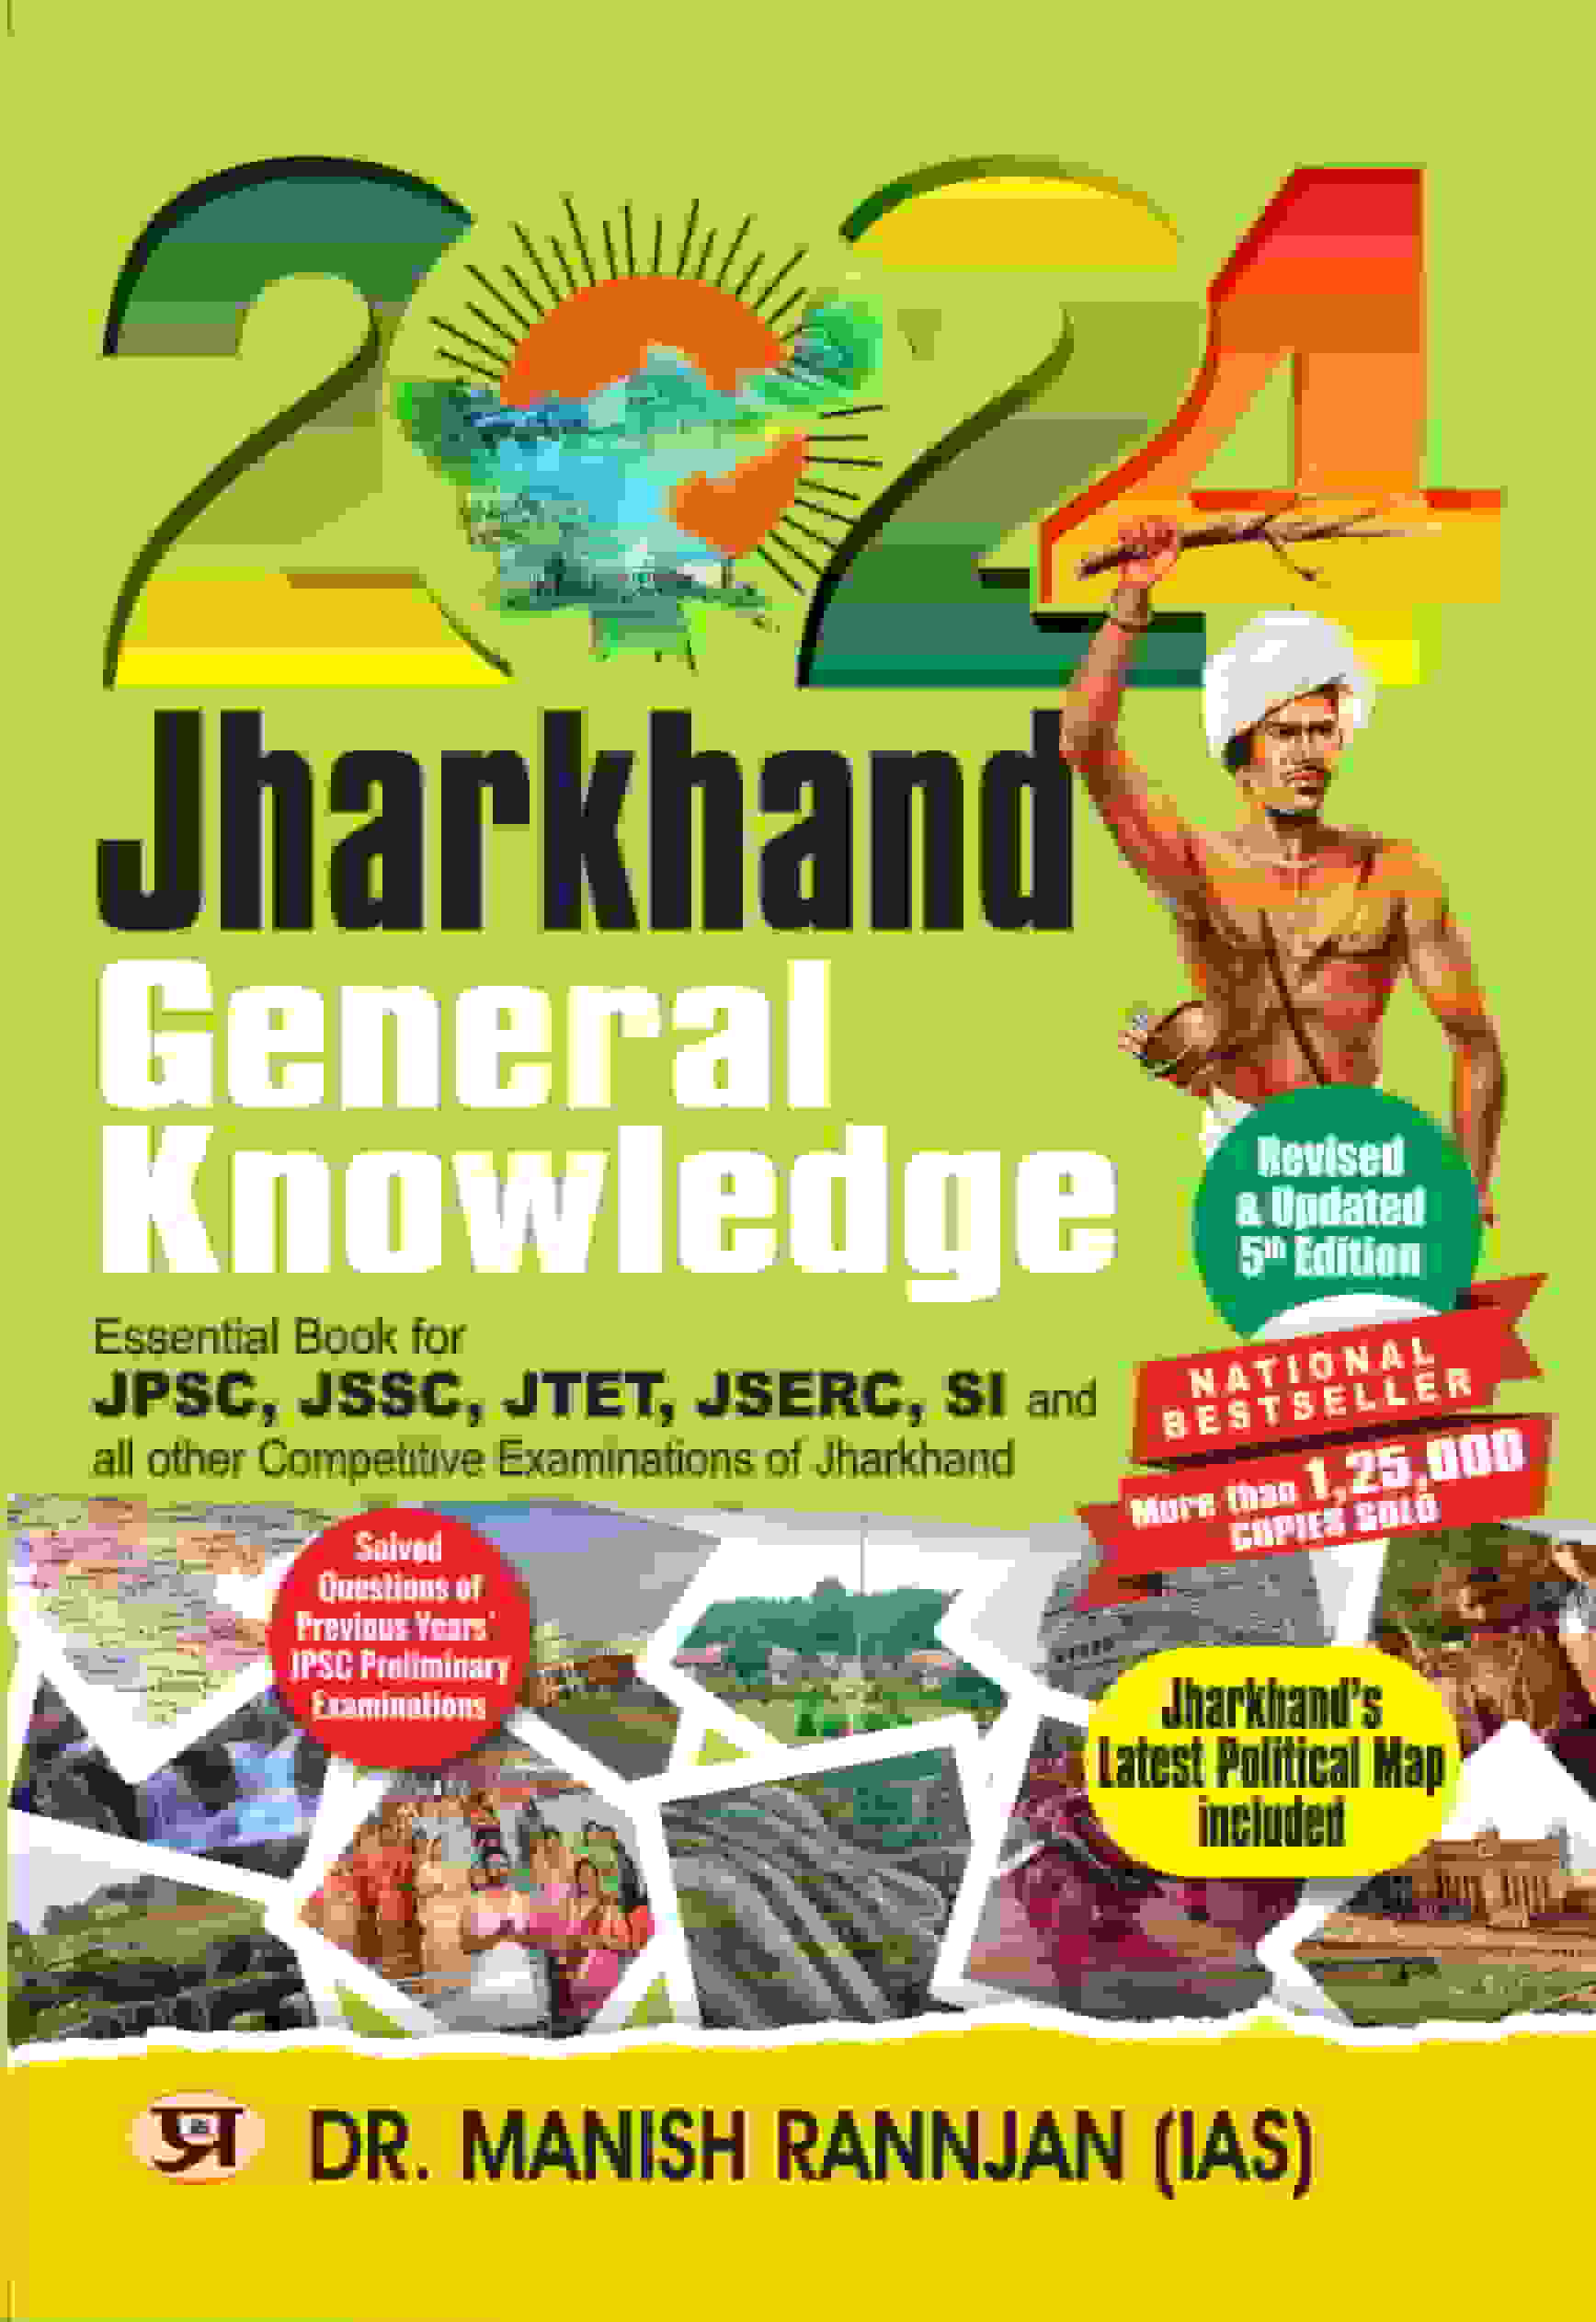 Jharkhand GK: General Knowledge Book for JPSC, JSSC, JTET, JSERC, SI and All Other Jharkhand Competitive Exam | Jharkhand Latest Political Map | Solved Question of Previous Years